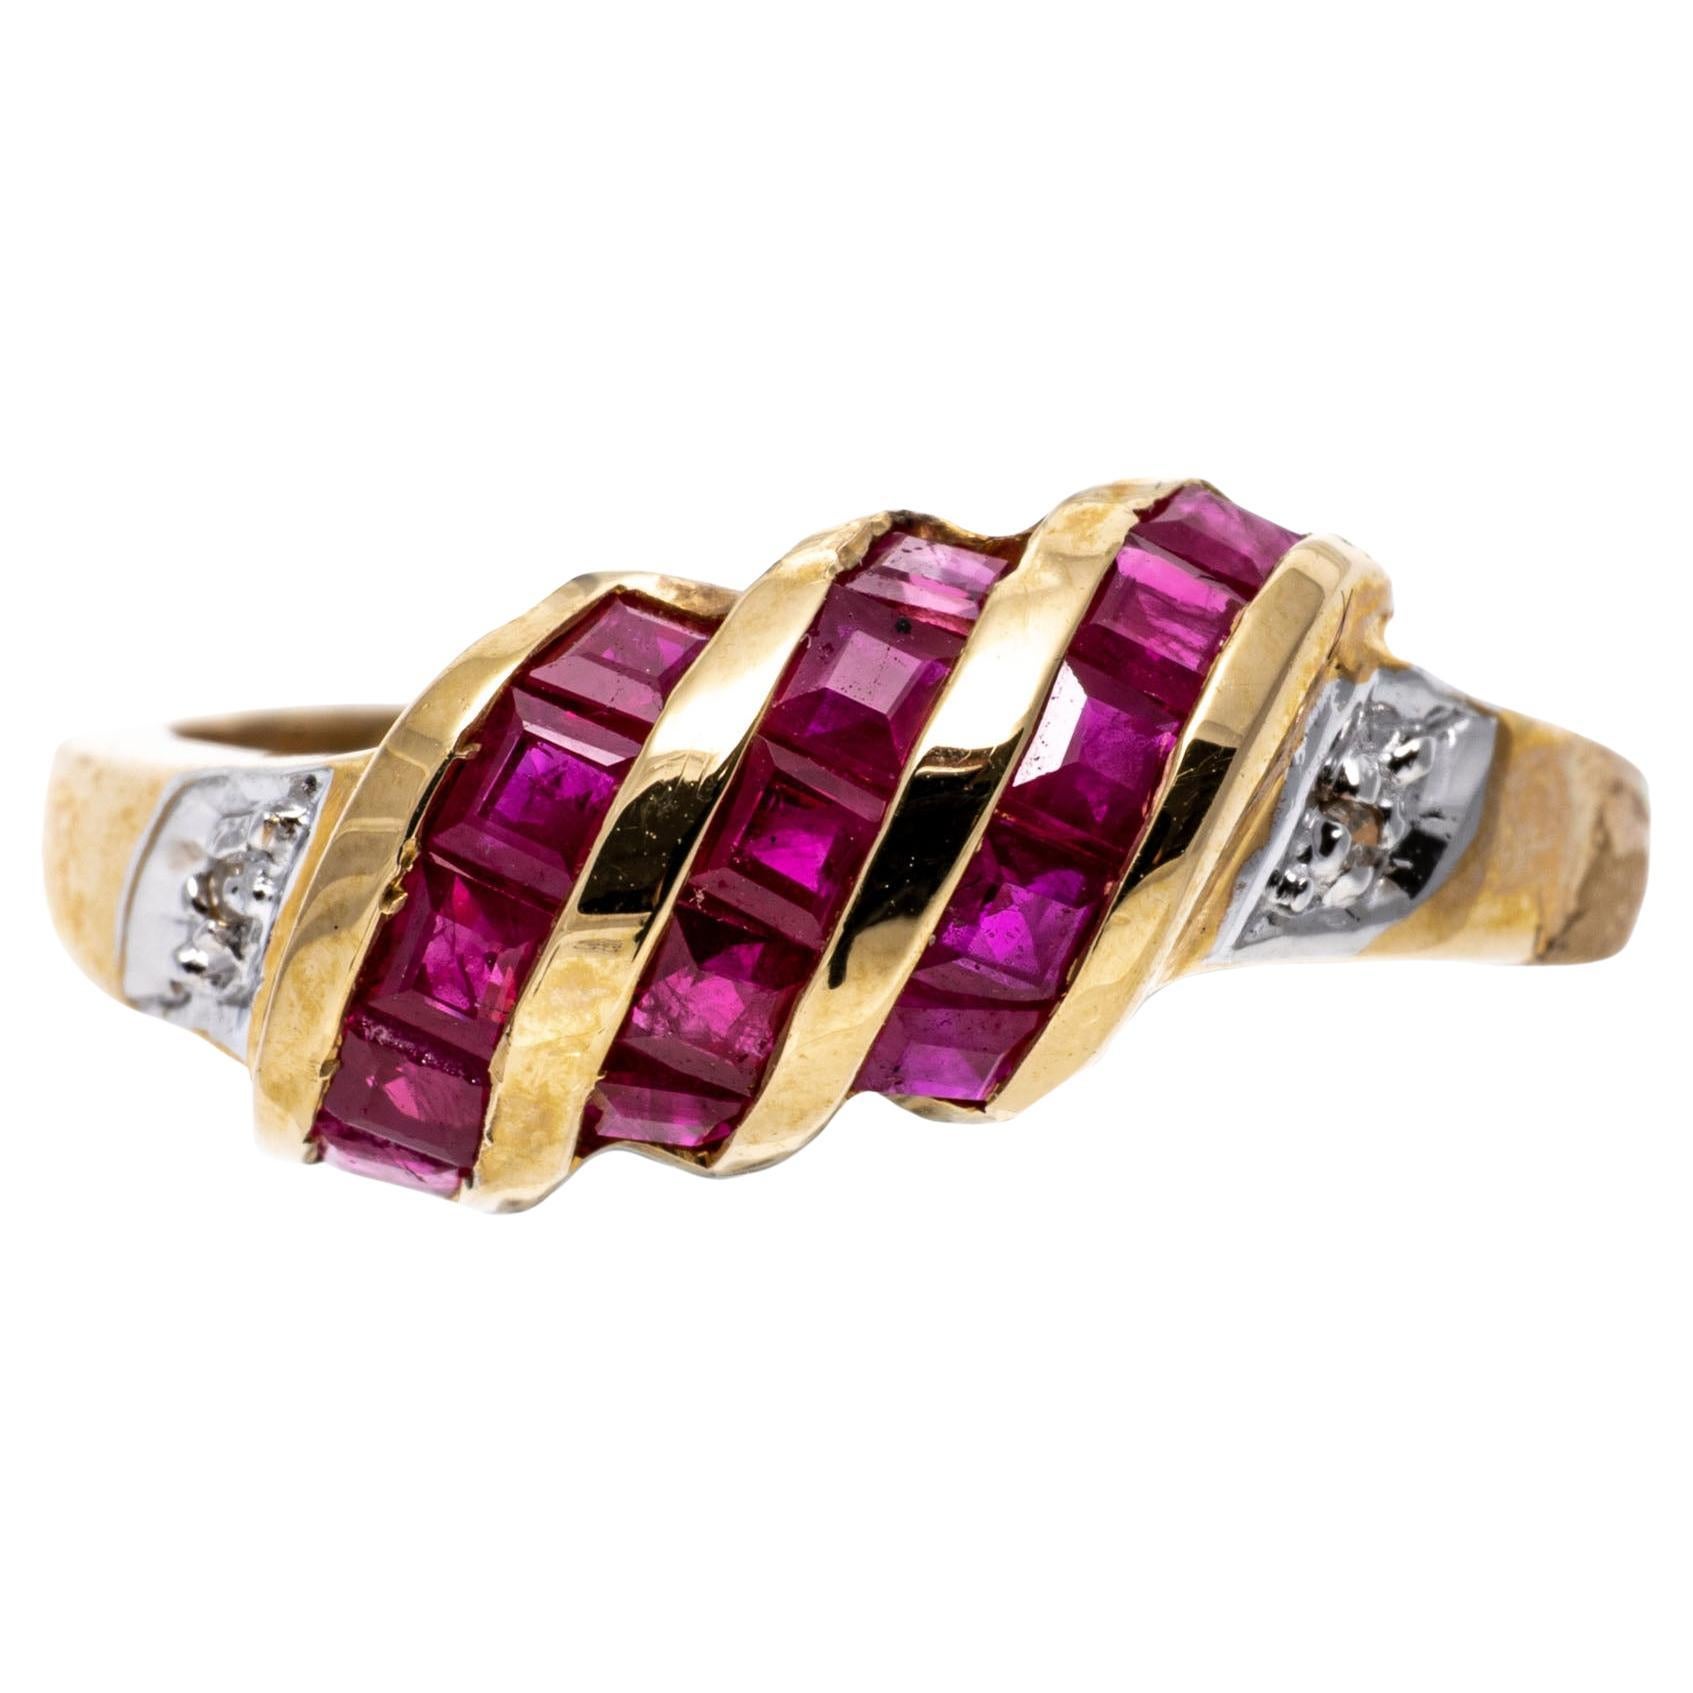 14K Yellow Gold Slanted Square Ruby Dome Ring with Diamonds